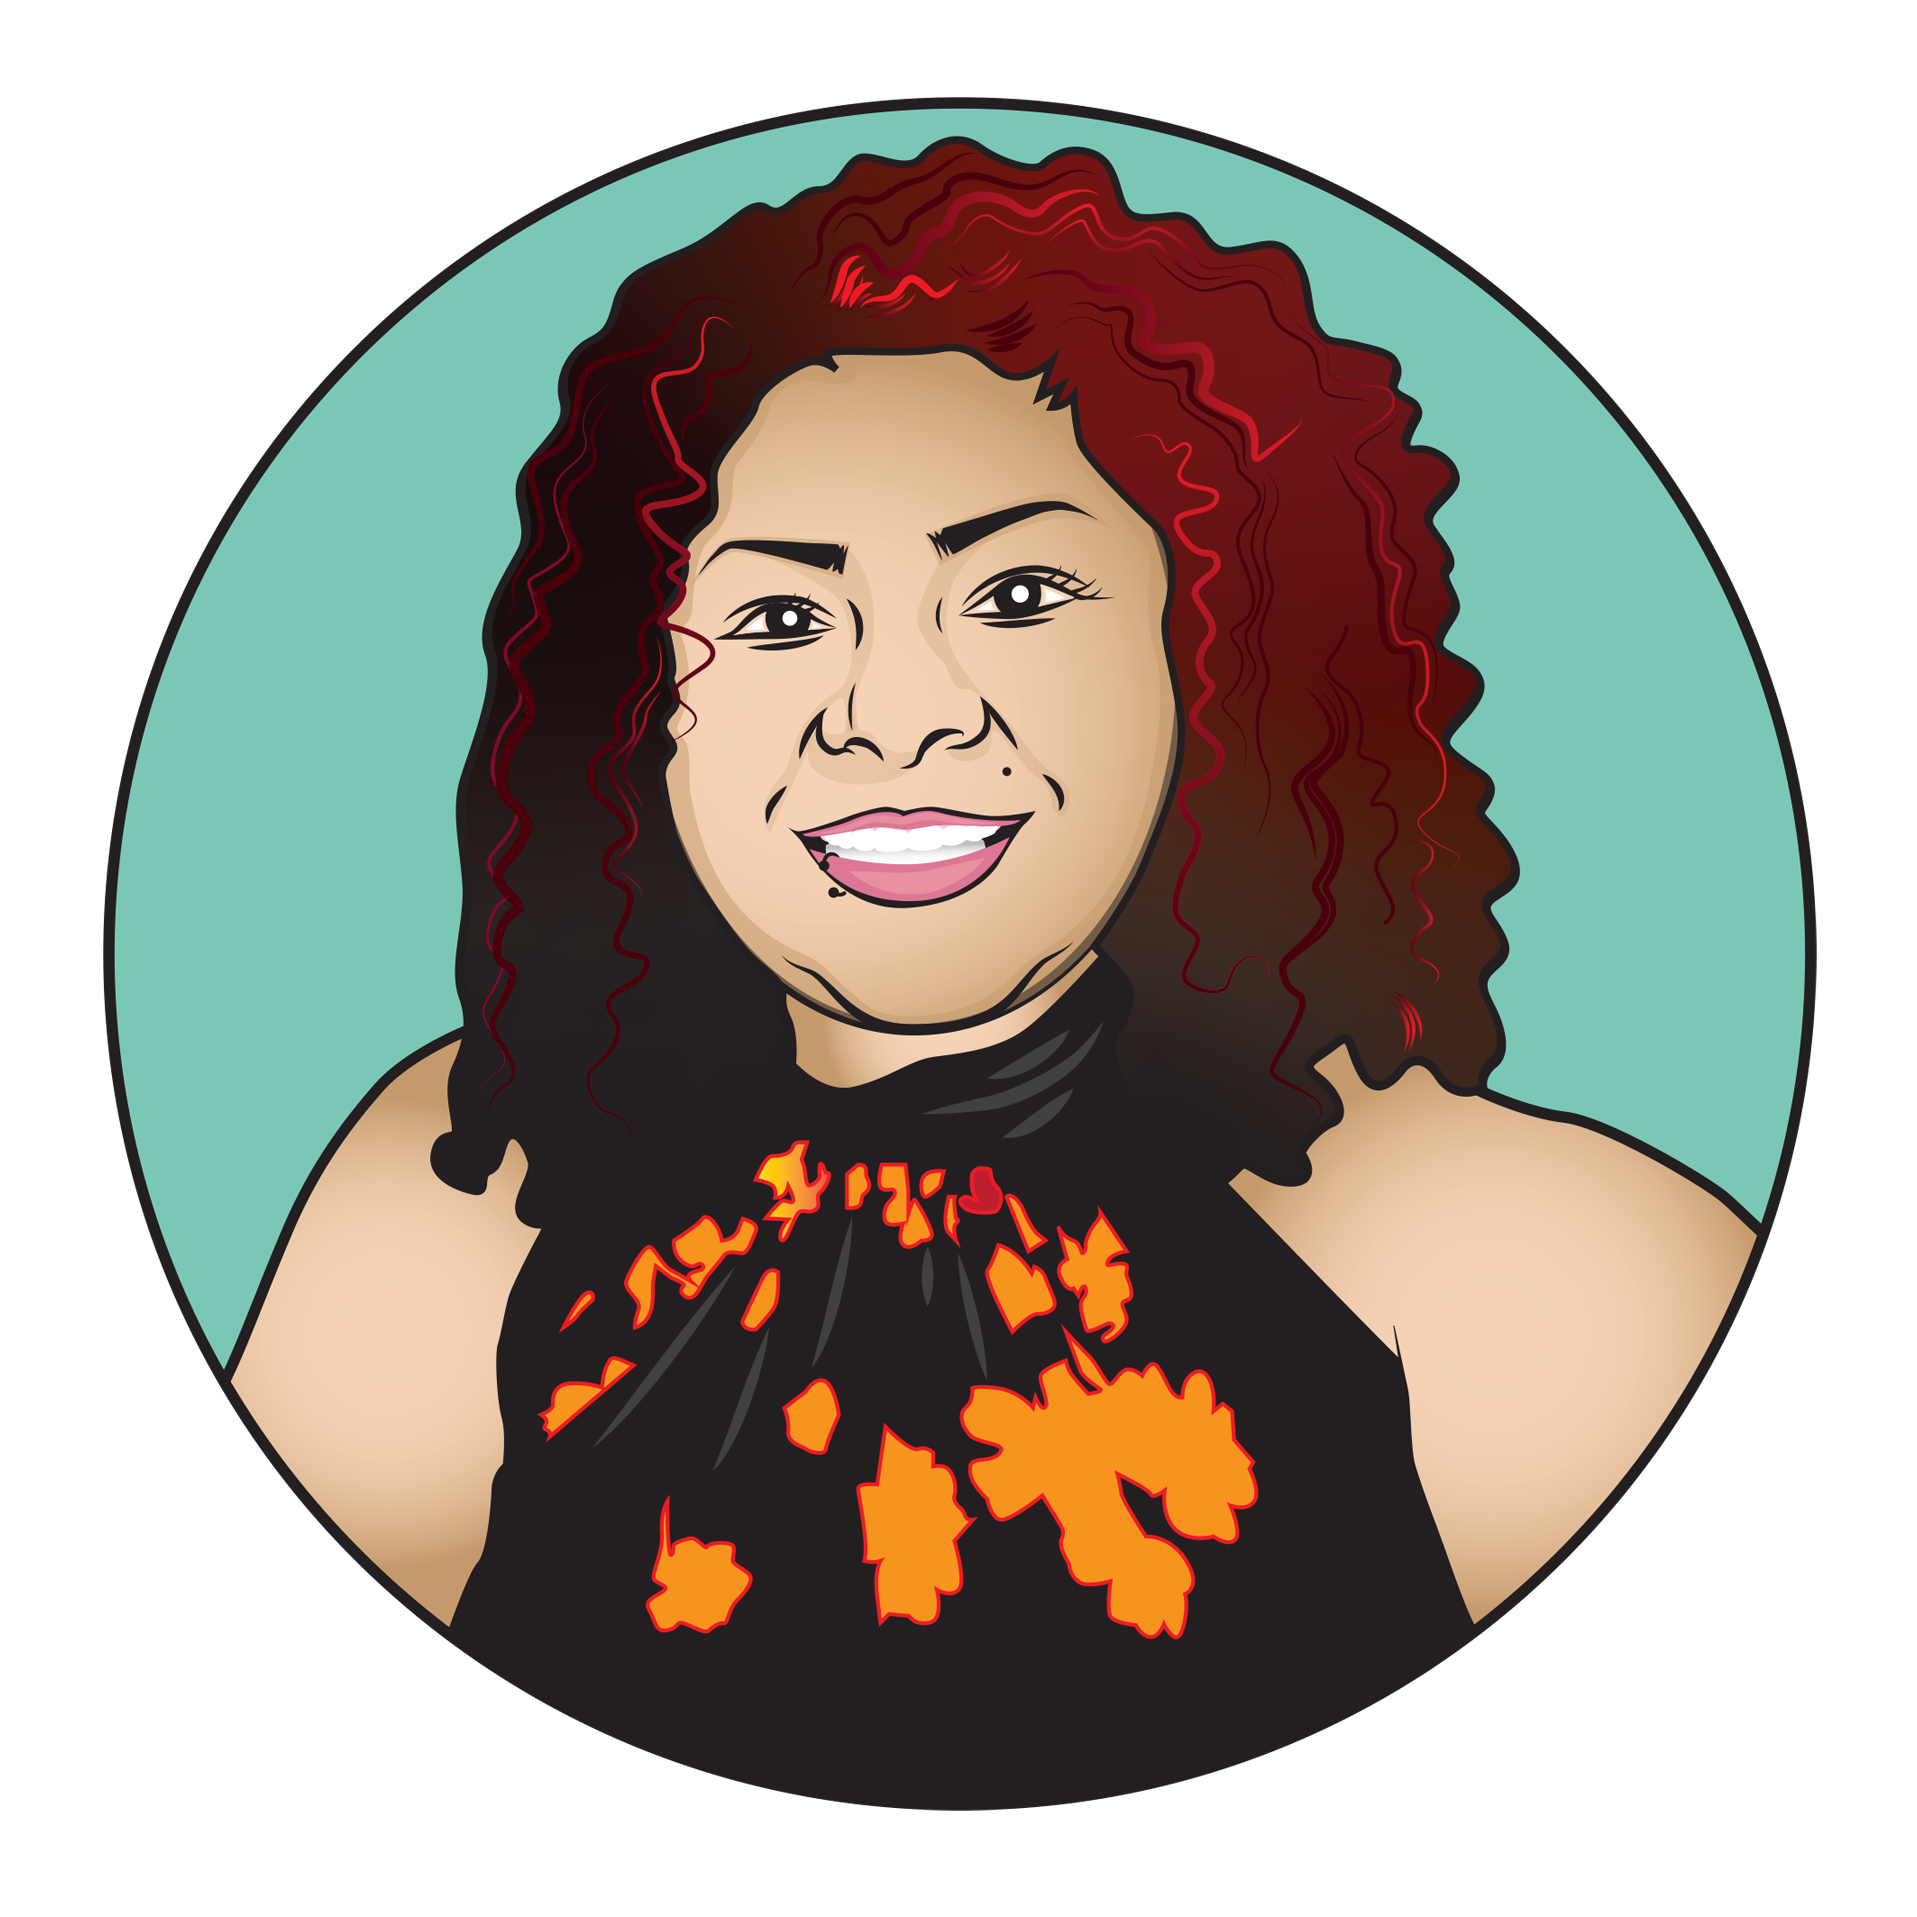 An illustrated image of Xochitl, a lighter brown skinned person with black and red hair. She is wearing a black tank top with orange flowers. Her image is on a teal background.